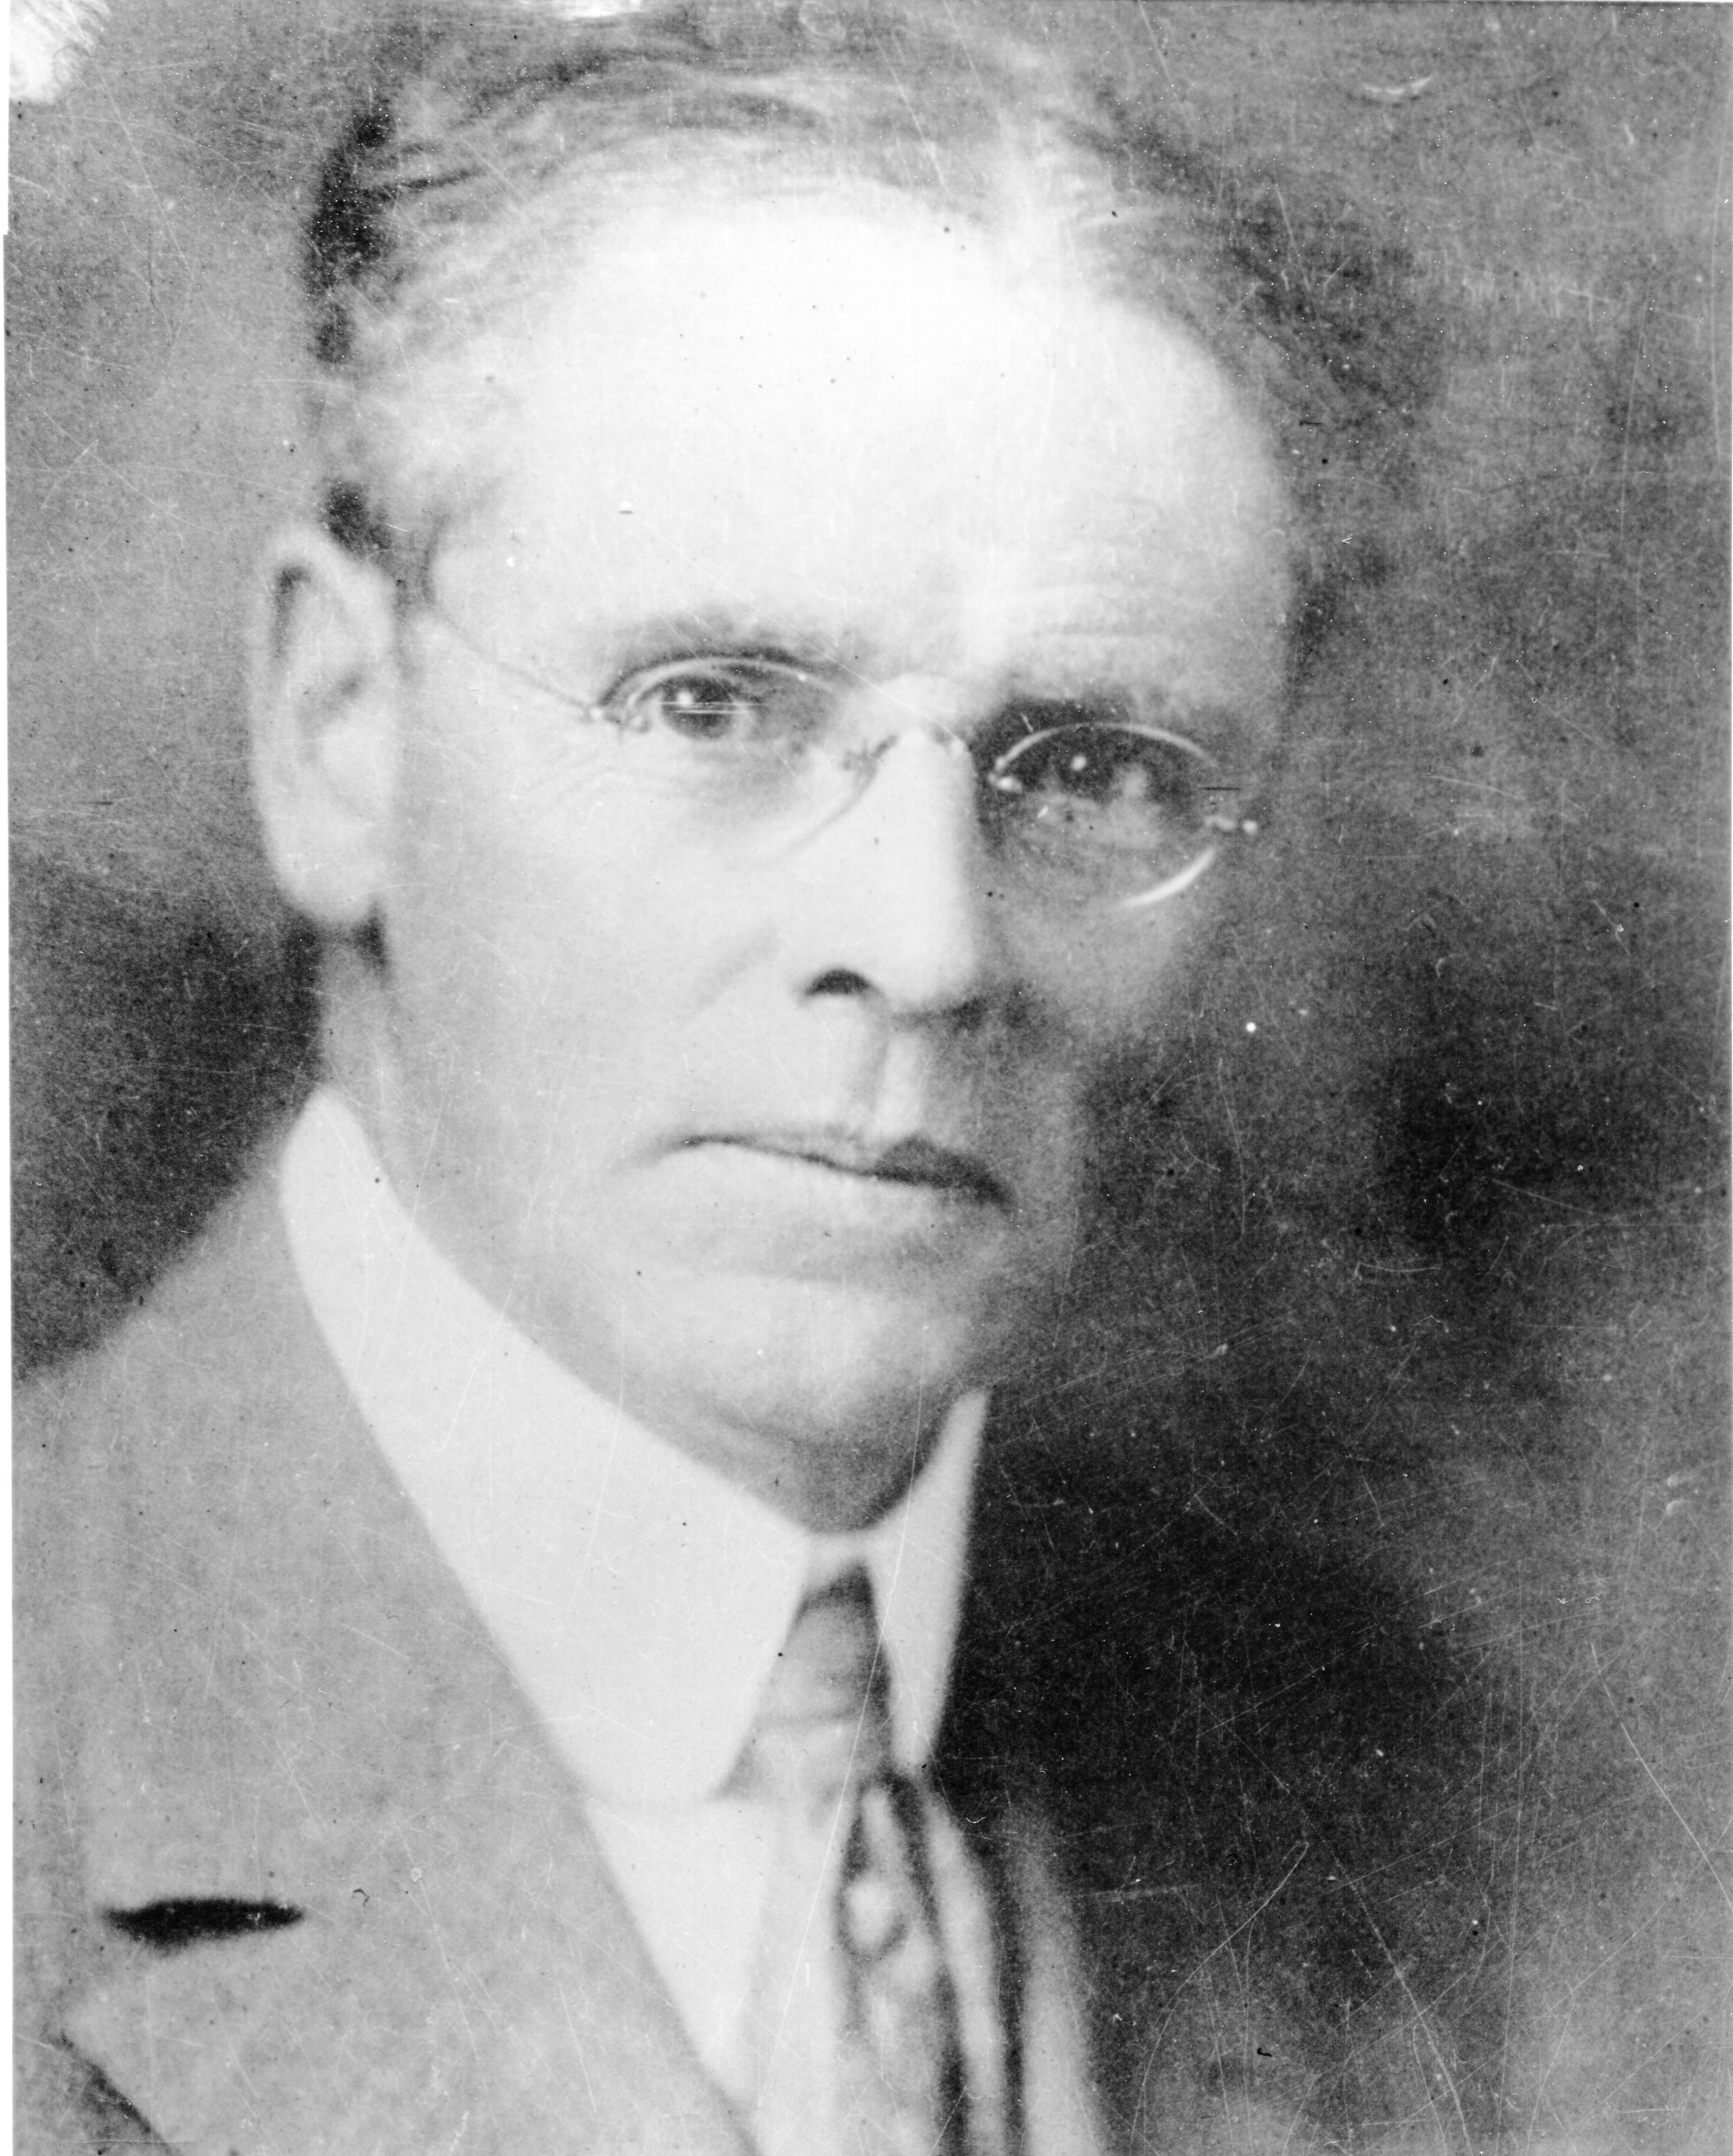 Portrait of stern man in wire frame glasses